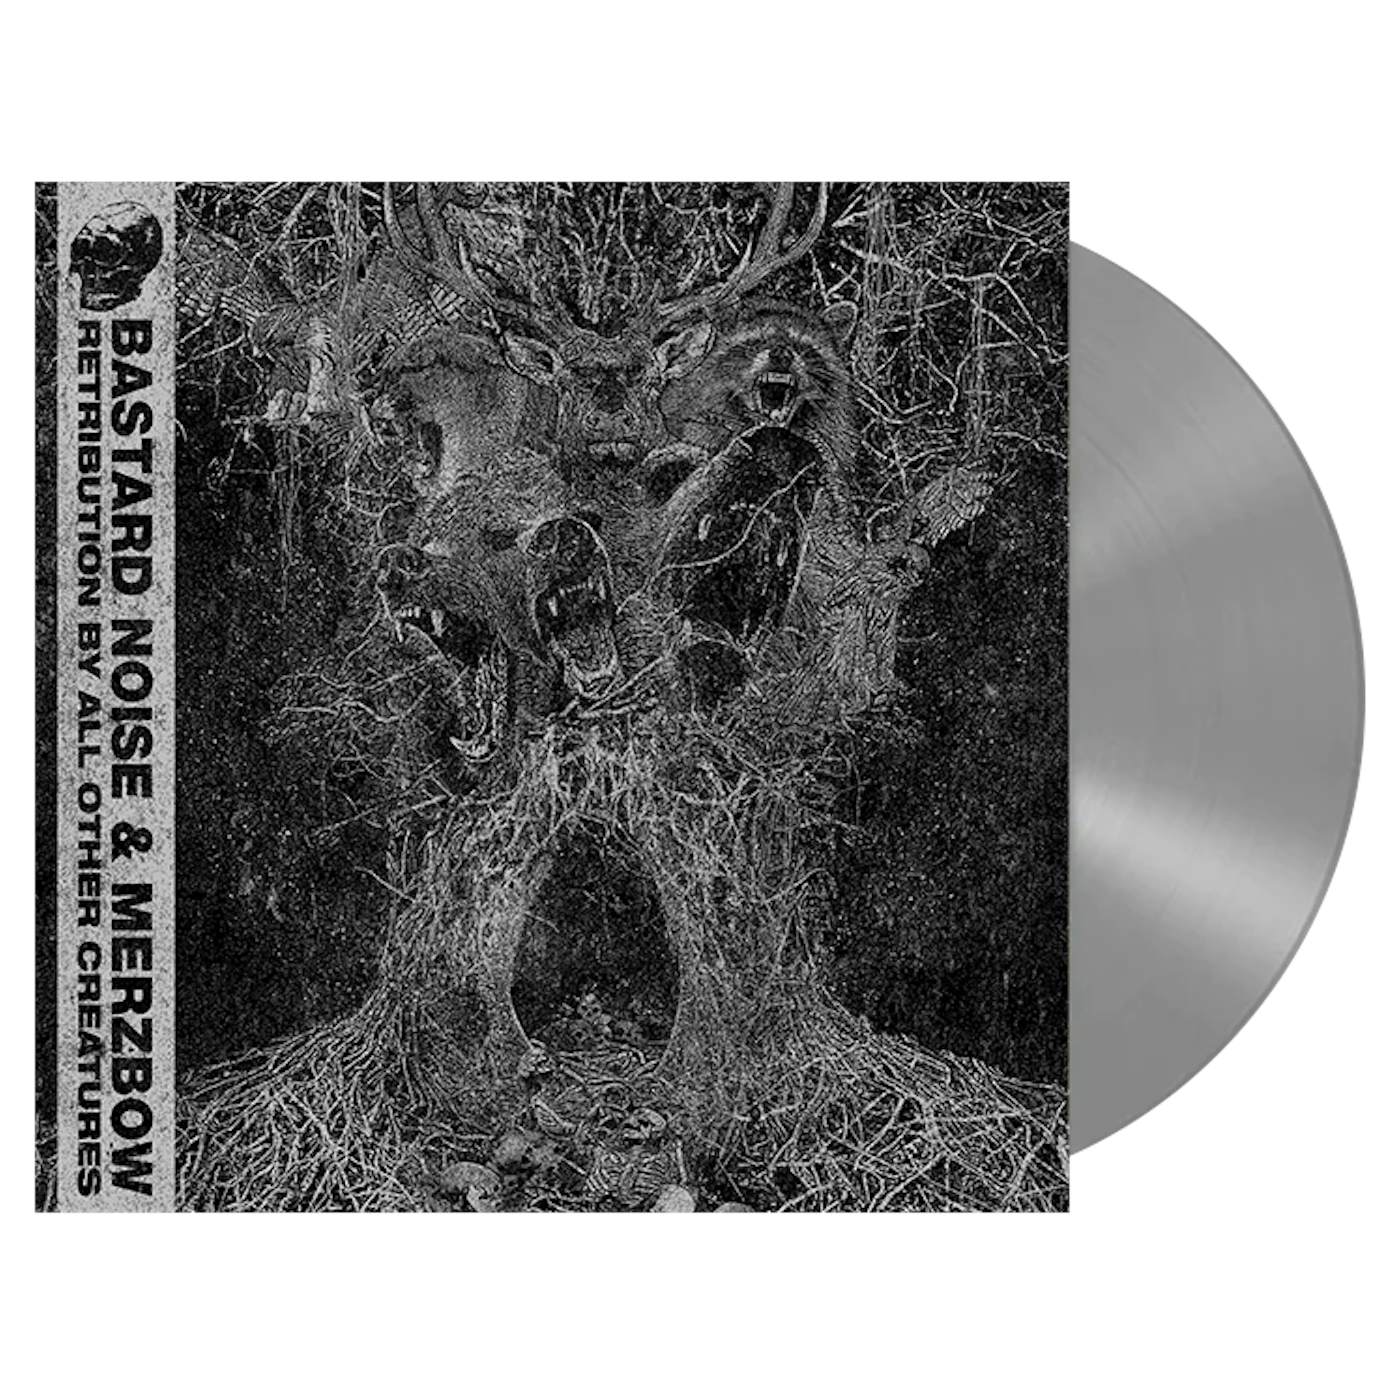 The Bastard Noise / MERZBOW - 'Retribution By All Other Creatures' LP (Vinyl)